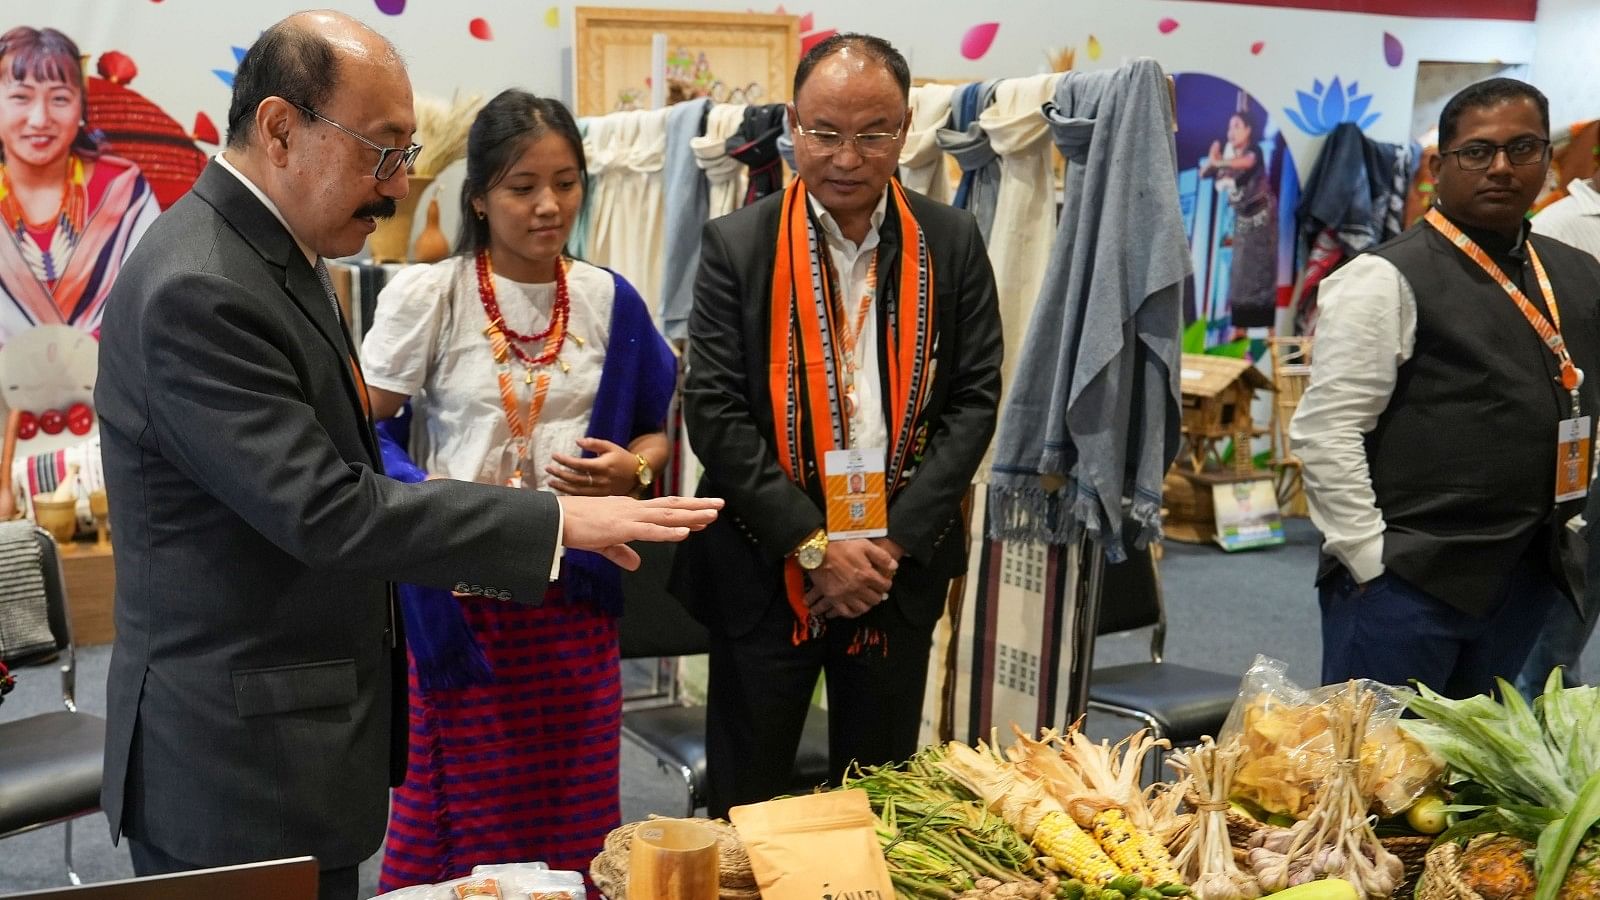 <div class="paragraphs"><p>G20 Chief Coordinator Harsh Vardhan Shringla (first from left) visits the G20 Crafts Bazaar, an exhibition-cum-sale, during the G20 Summit at the Bharat Mandapam, in New Delhi, on Saturday, 9 September.</p></div>